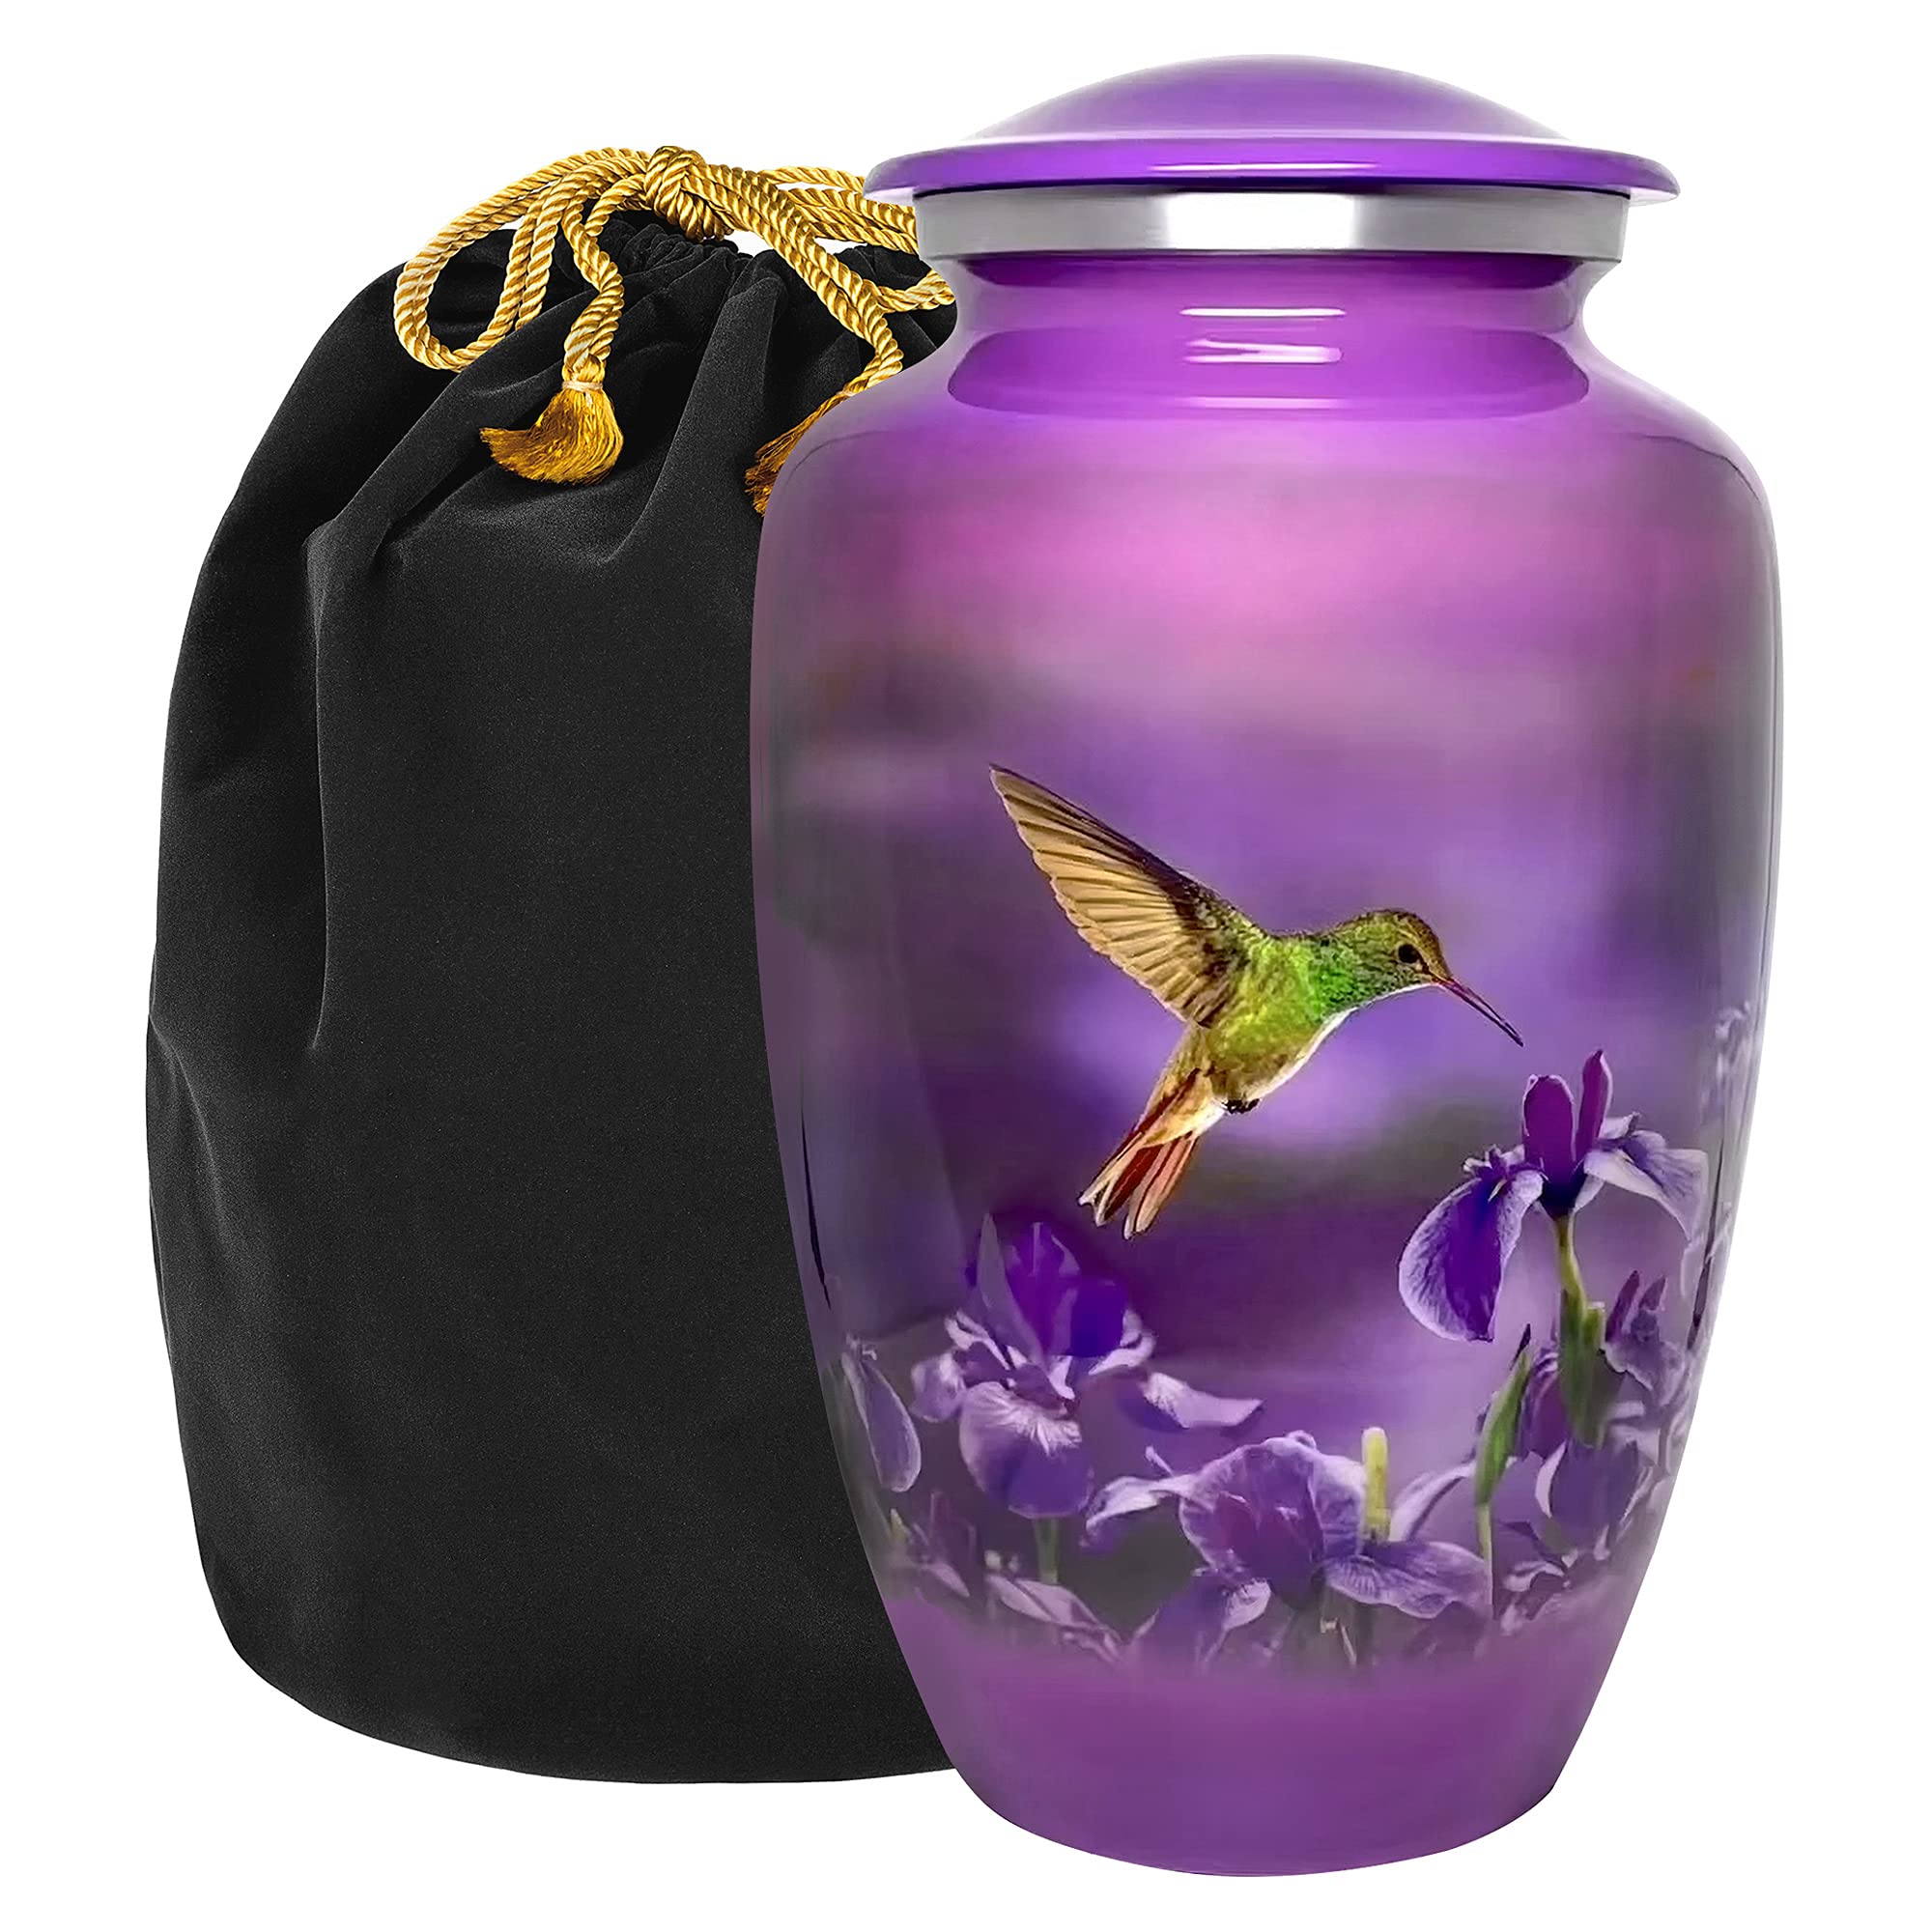 Natures Peace Hummingbird Adult Large Urn for Human Ashes - A Lovely Sharing Tokens to Remember Your Love One Lost